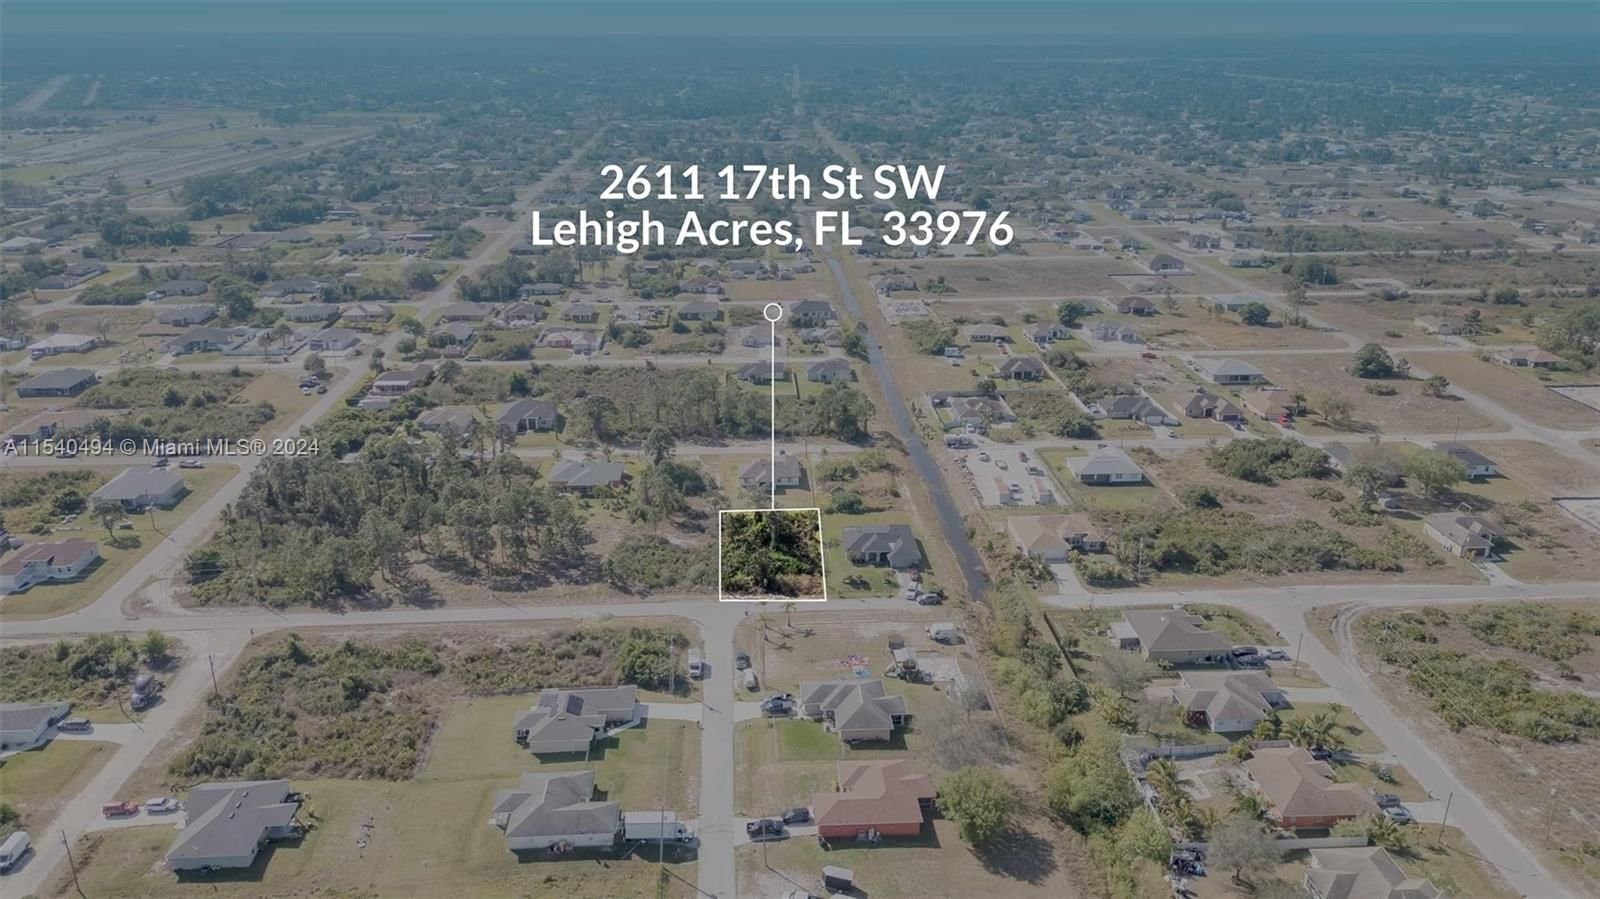 Real estate property located at 2611 17th st, Lee County, n/a, Lehigh Acres, FL